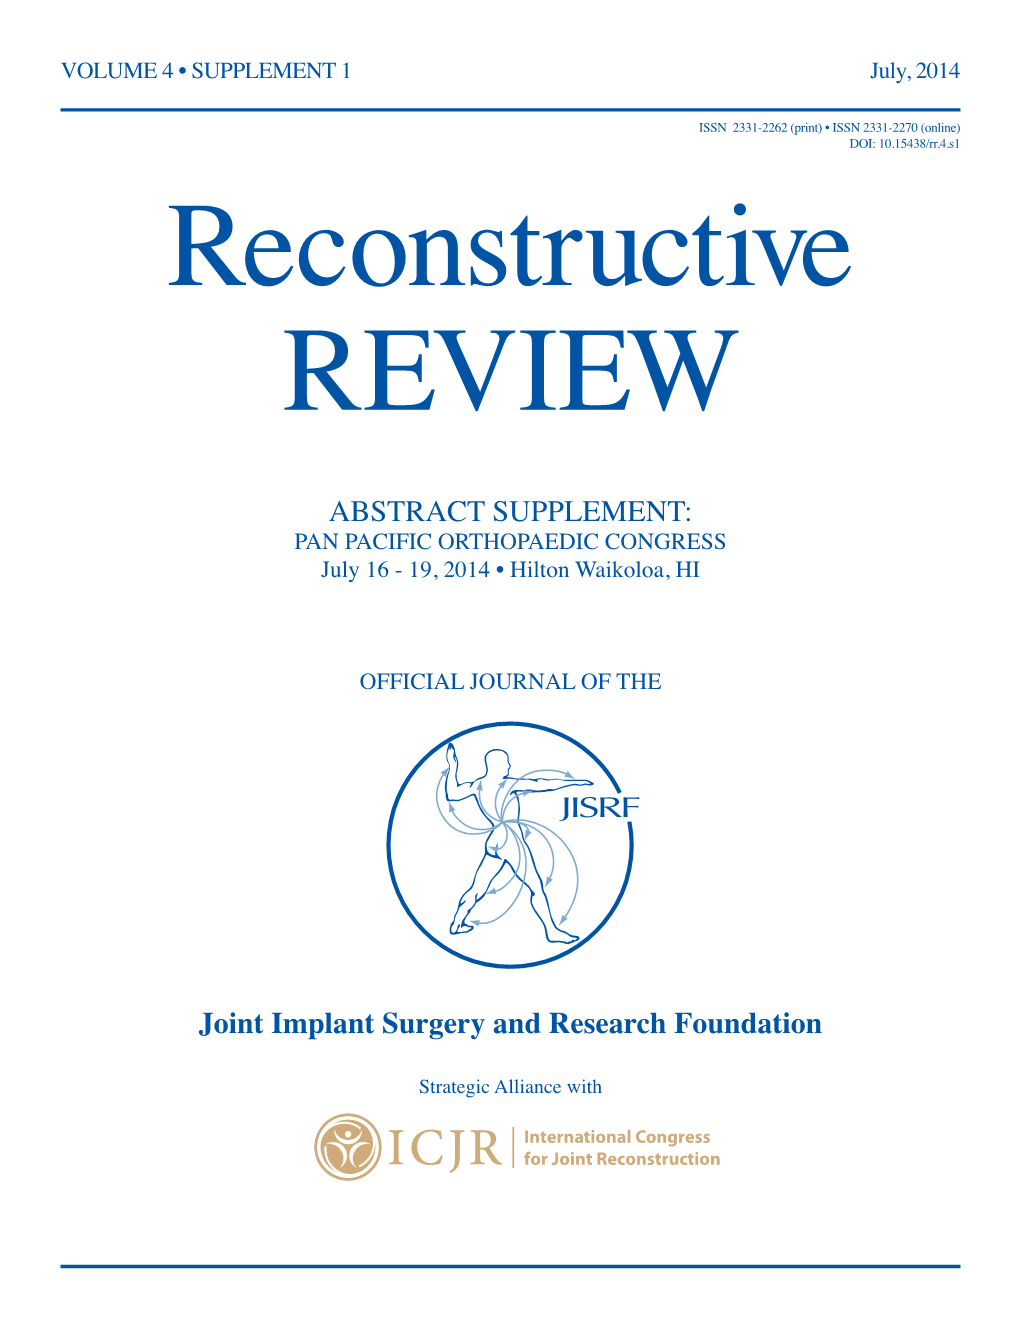 ABSTRACT SUPPLEMENT: Joint Implant Surgery and Research